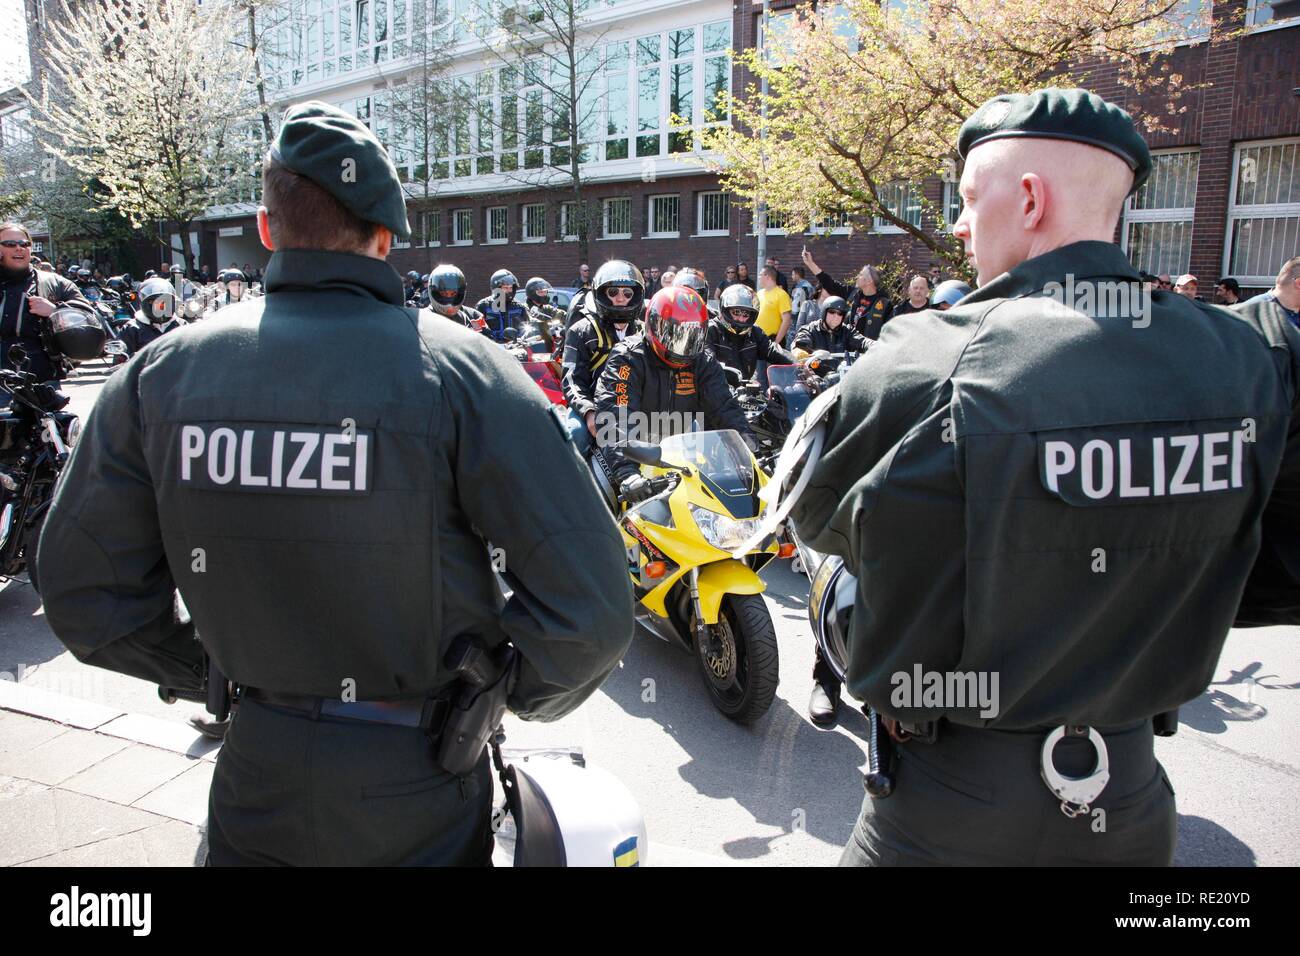 Police action at a get-together of the Bandidos motorcycle club, the City Run 2010 through downtown Essen Stock Photo